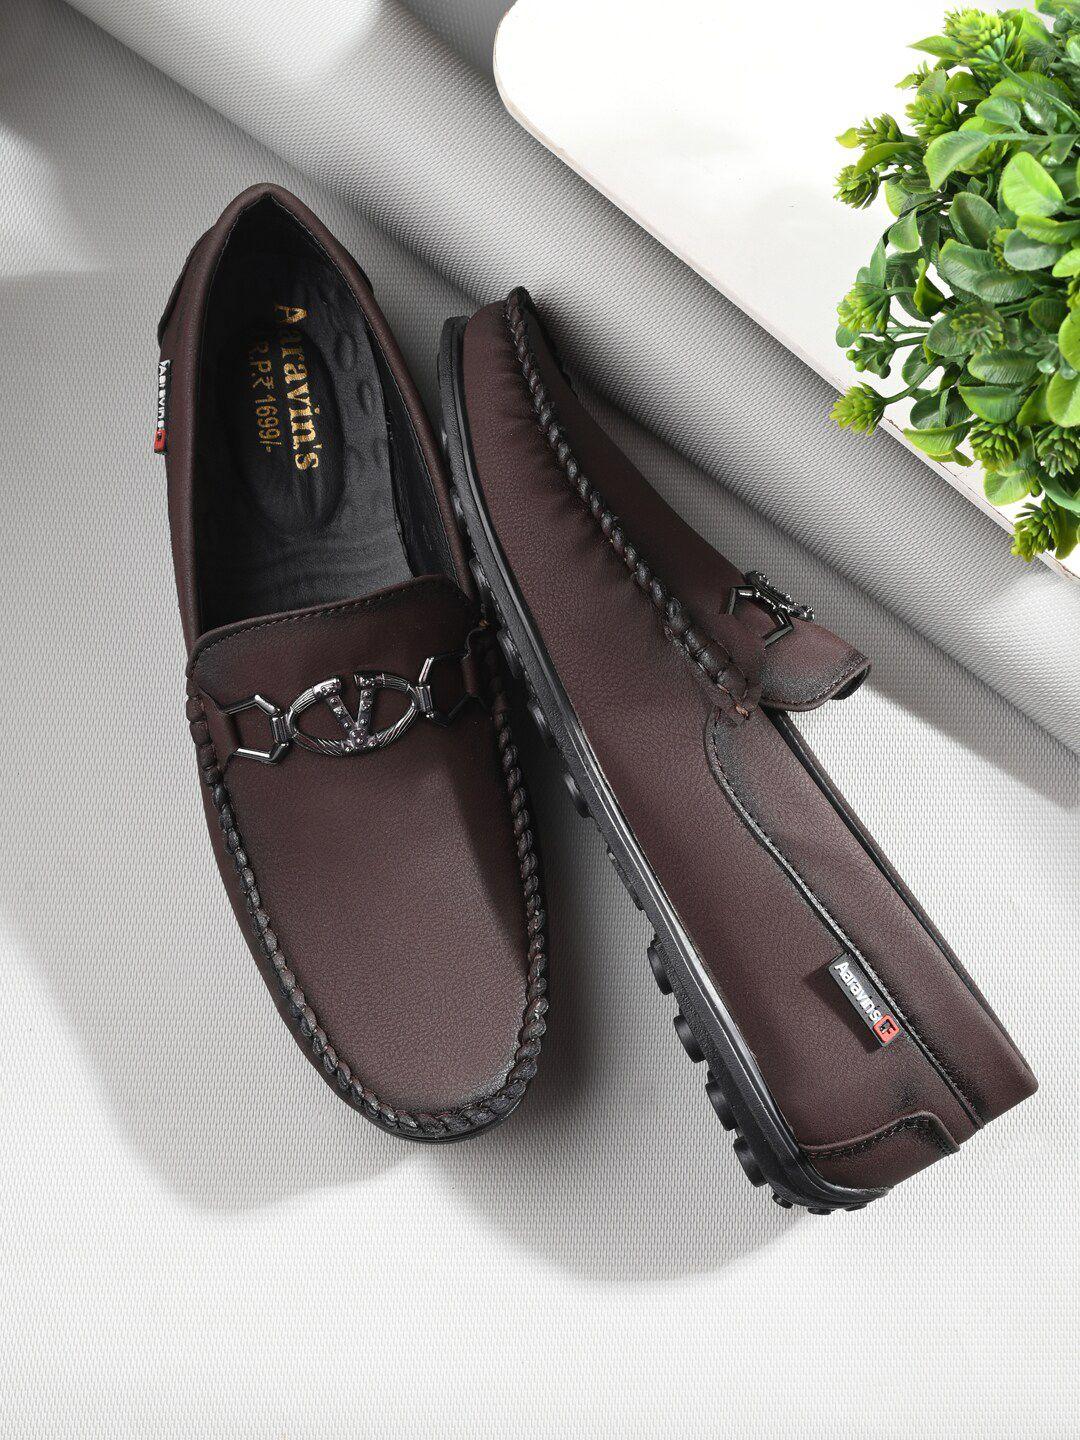 aaravin's men round toe loafers